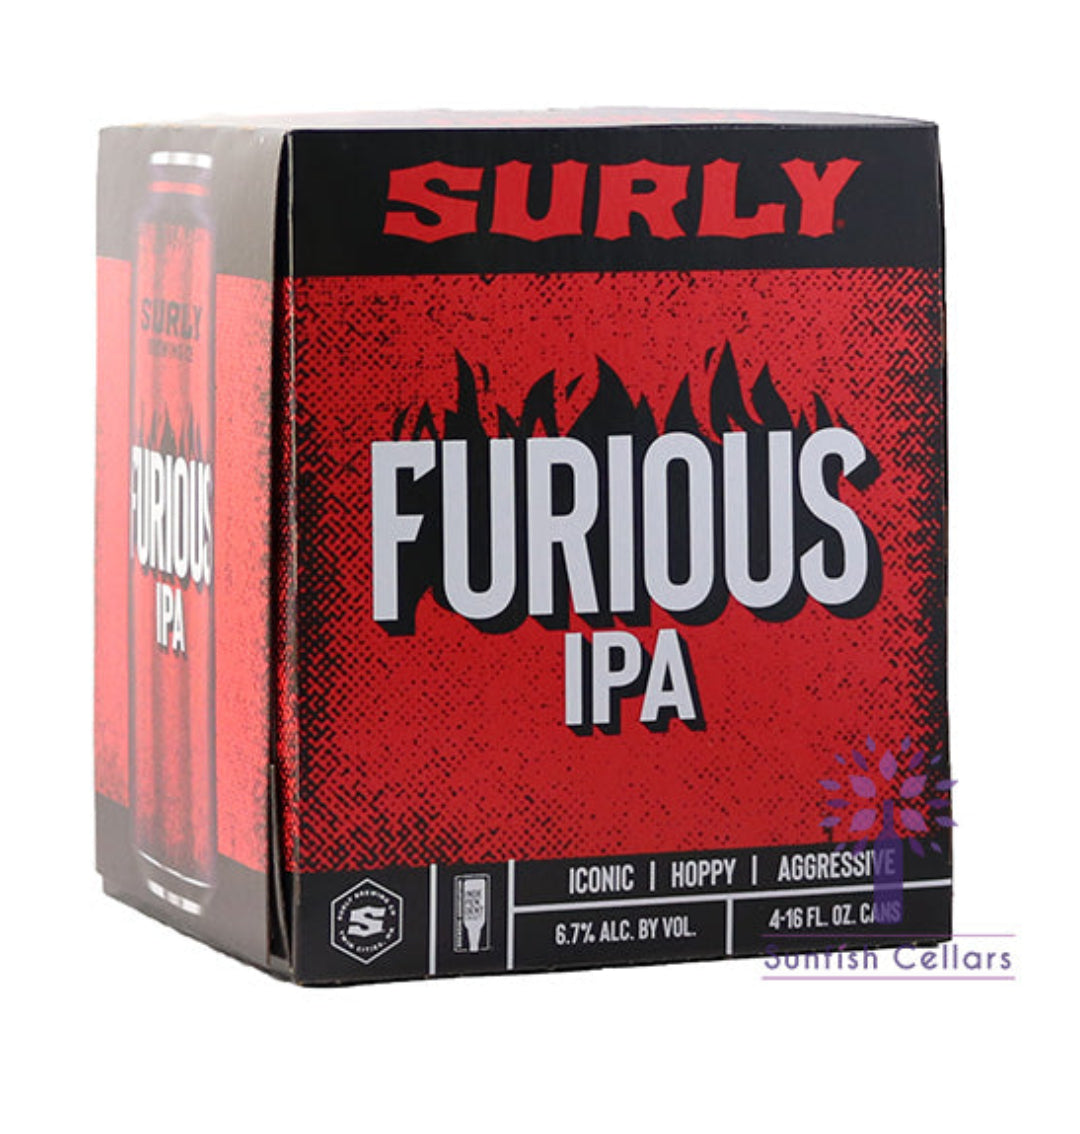 Surly Furious IPA 4 Pack 16oz Cans